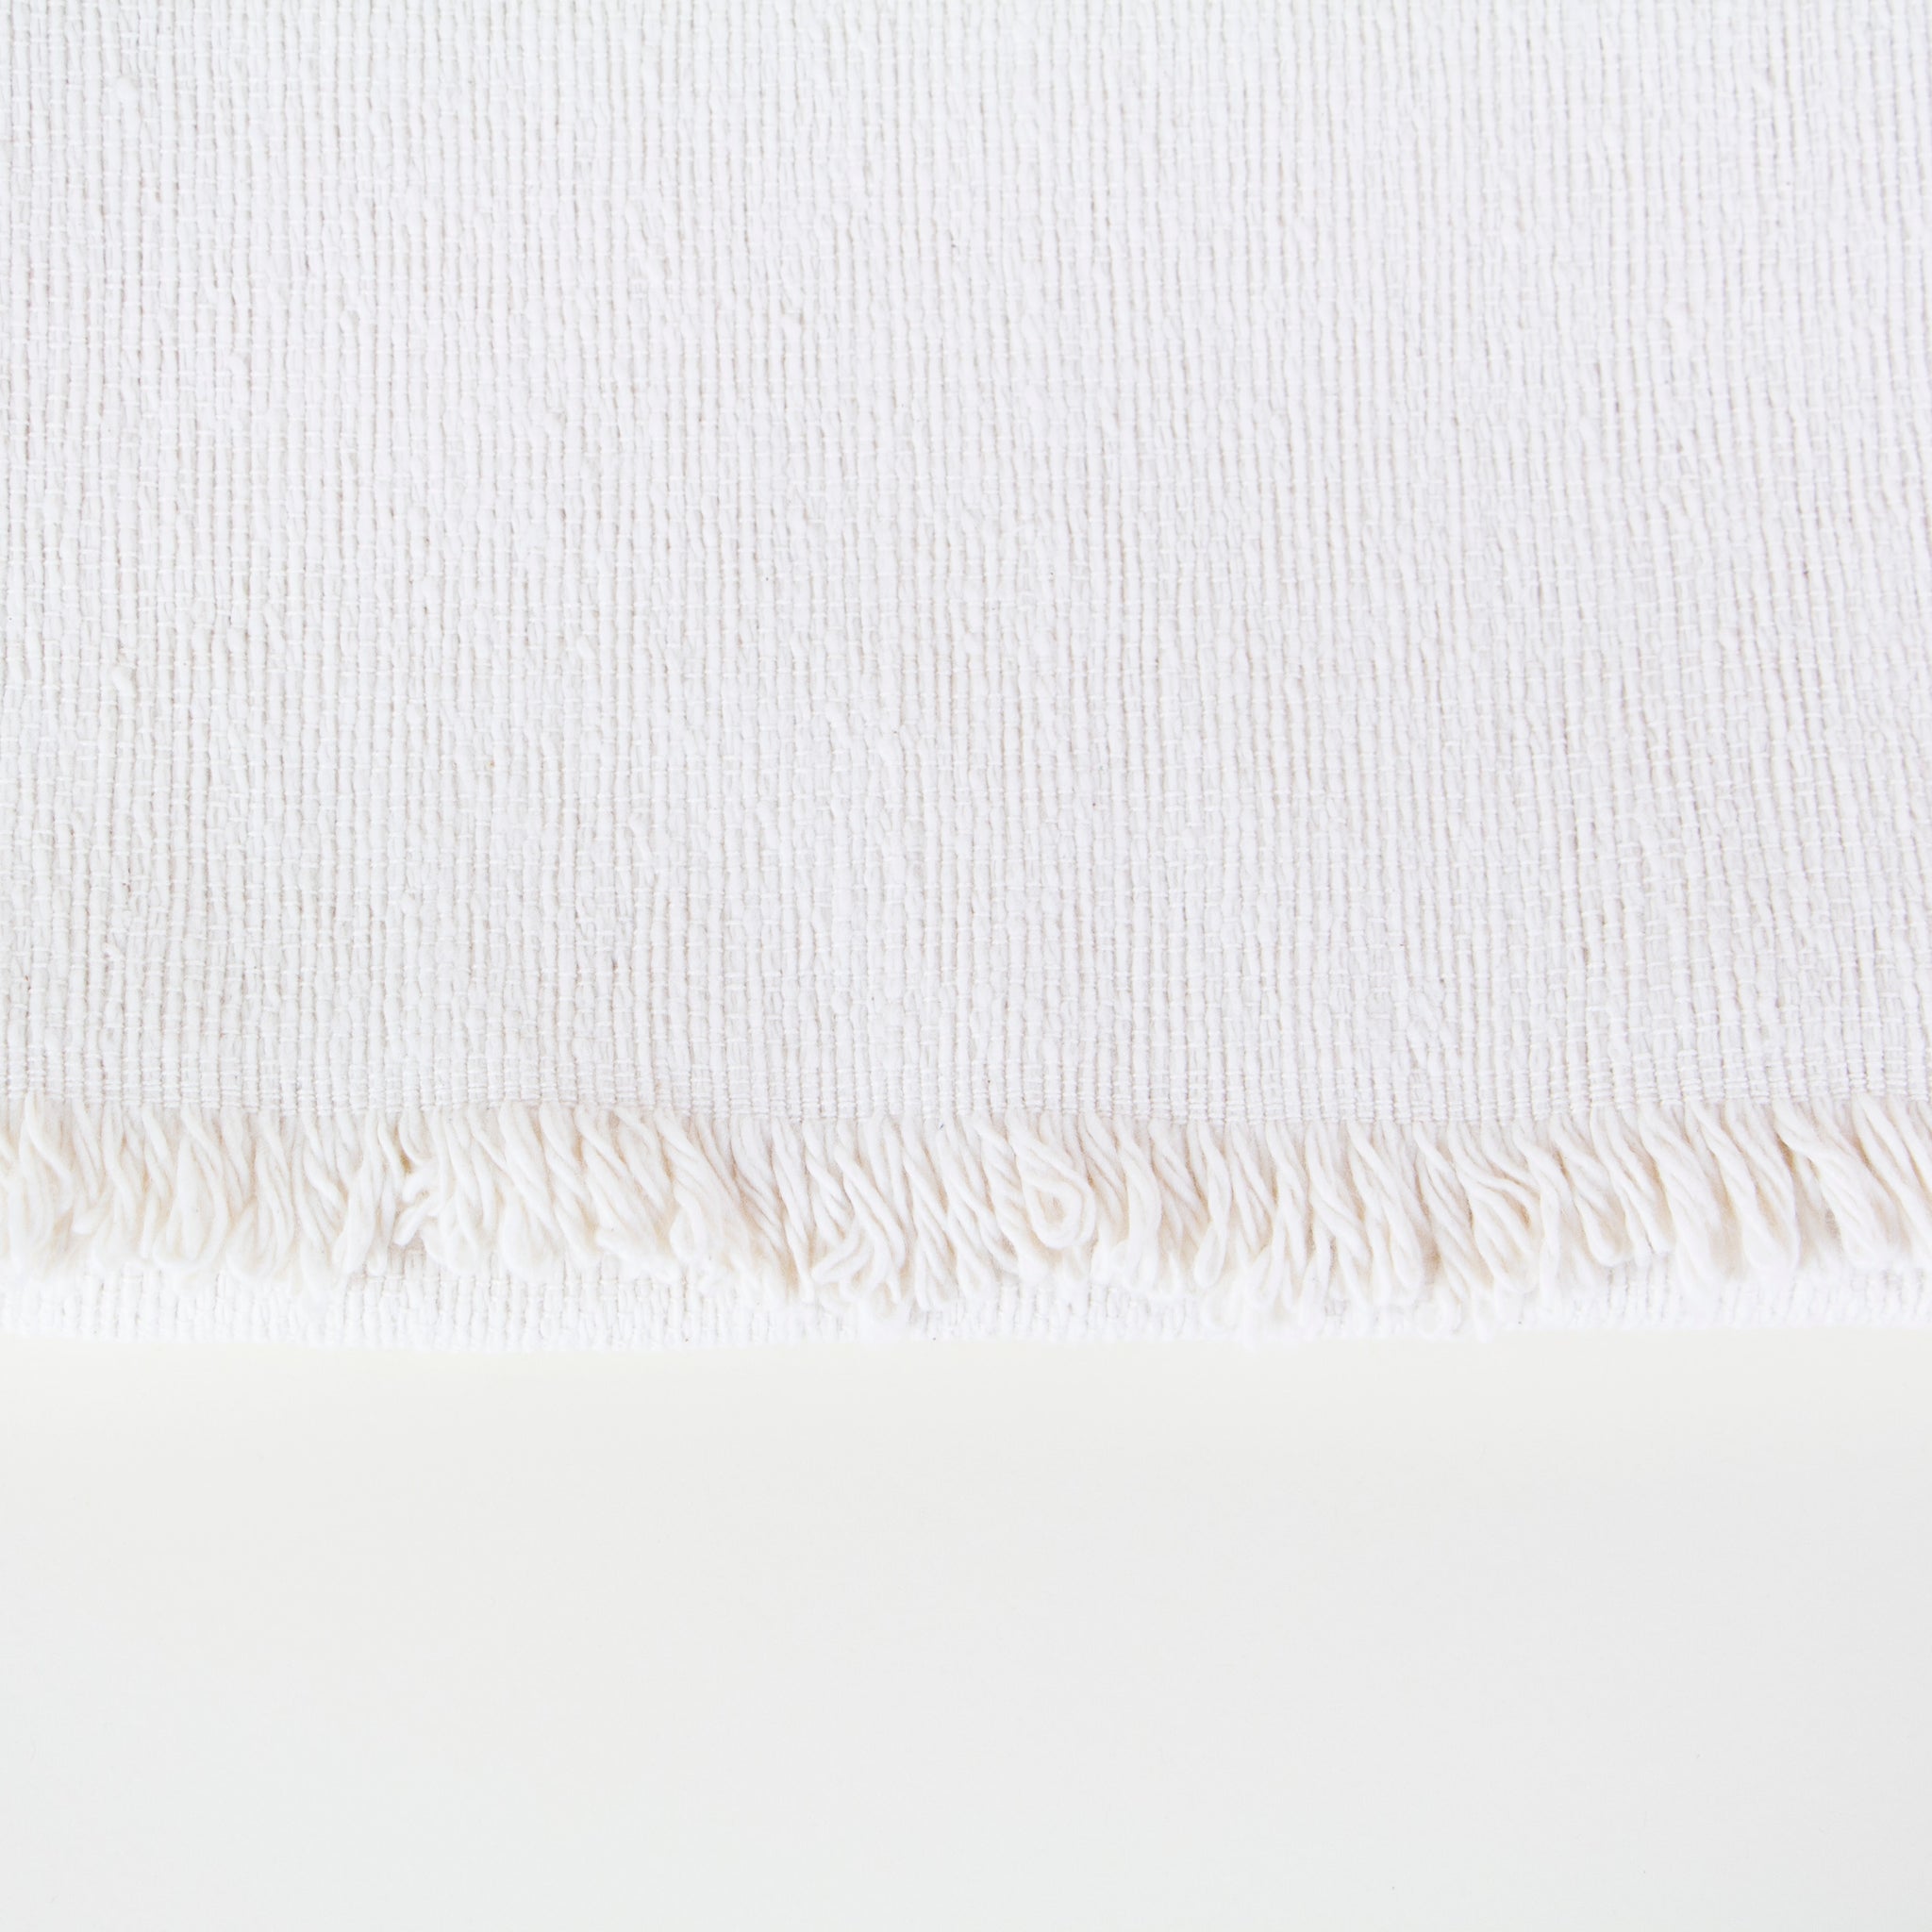 Cotton Table Runner | Under the Bough